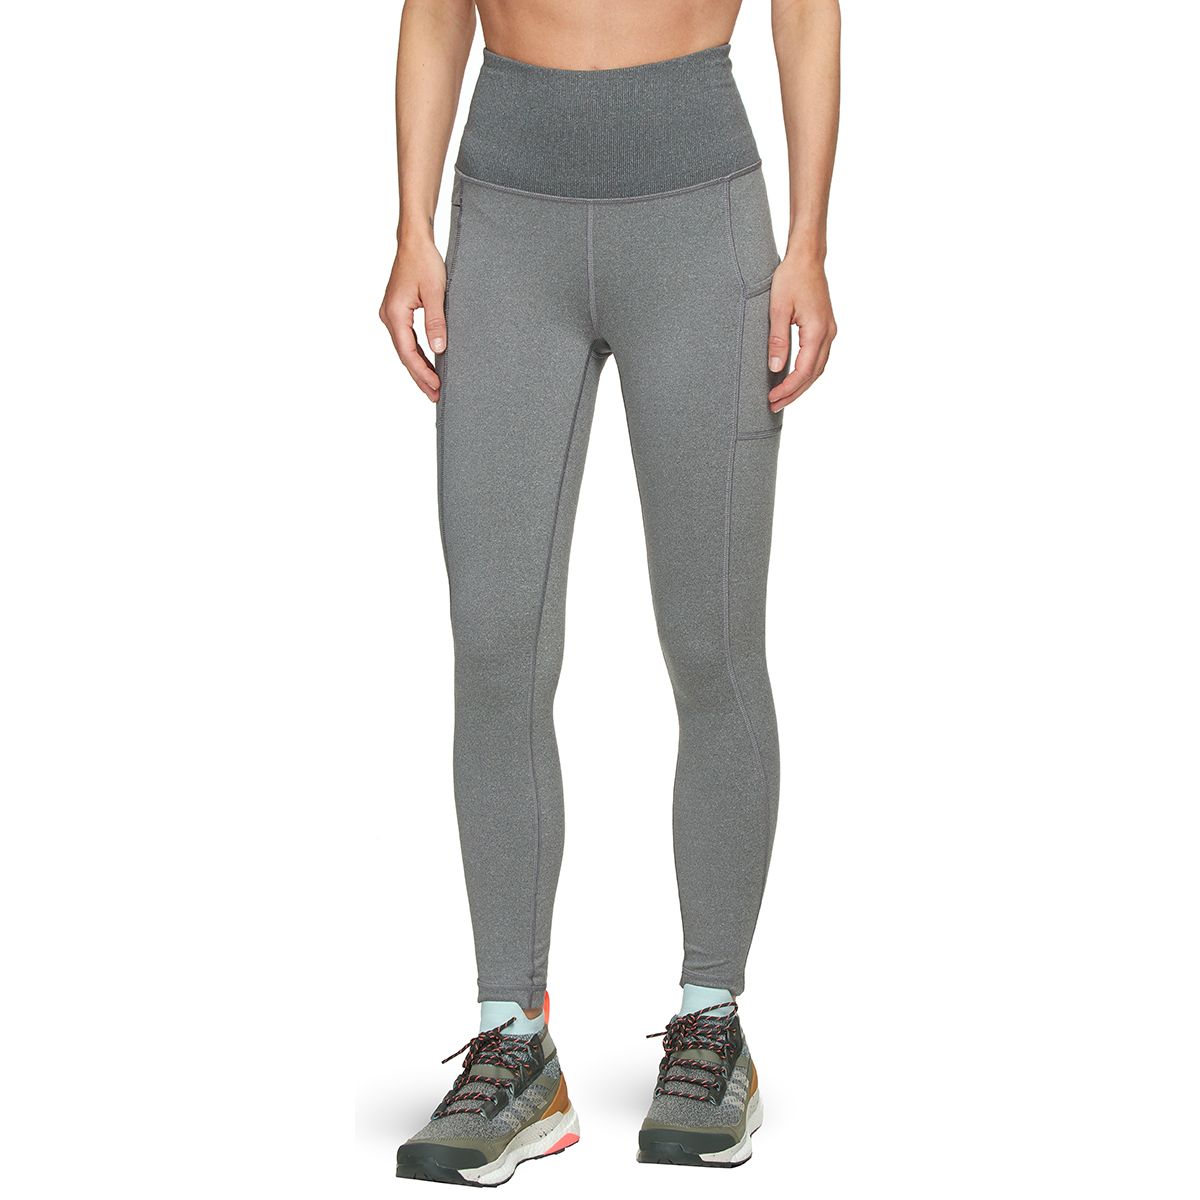 Patagonia Pack Out Lightweight Tight - Women's